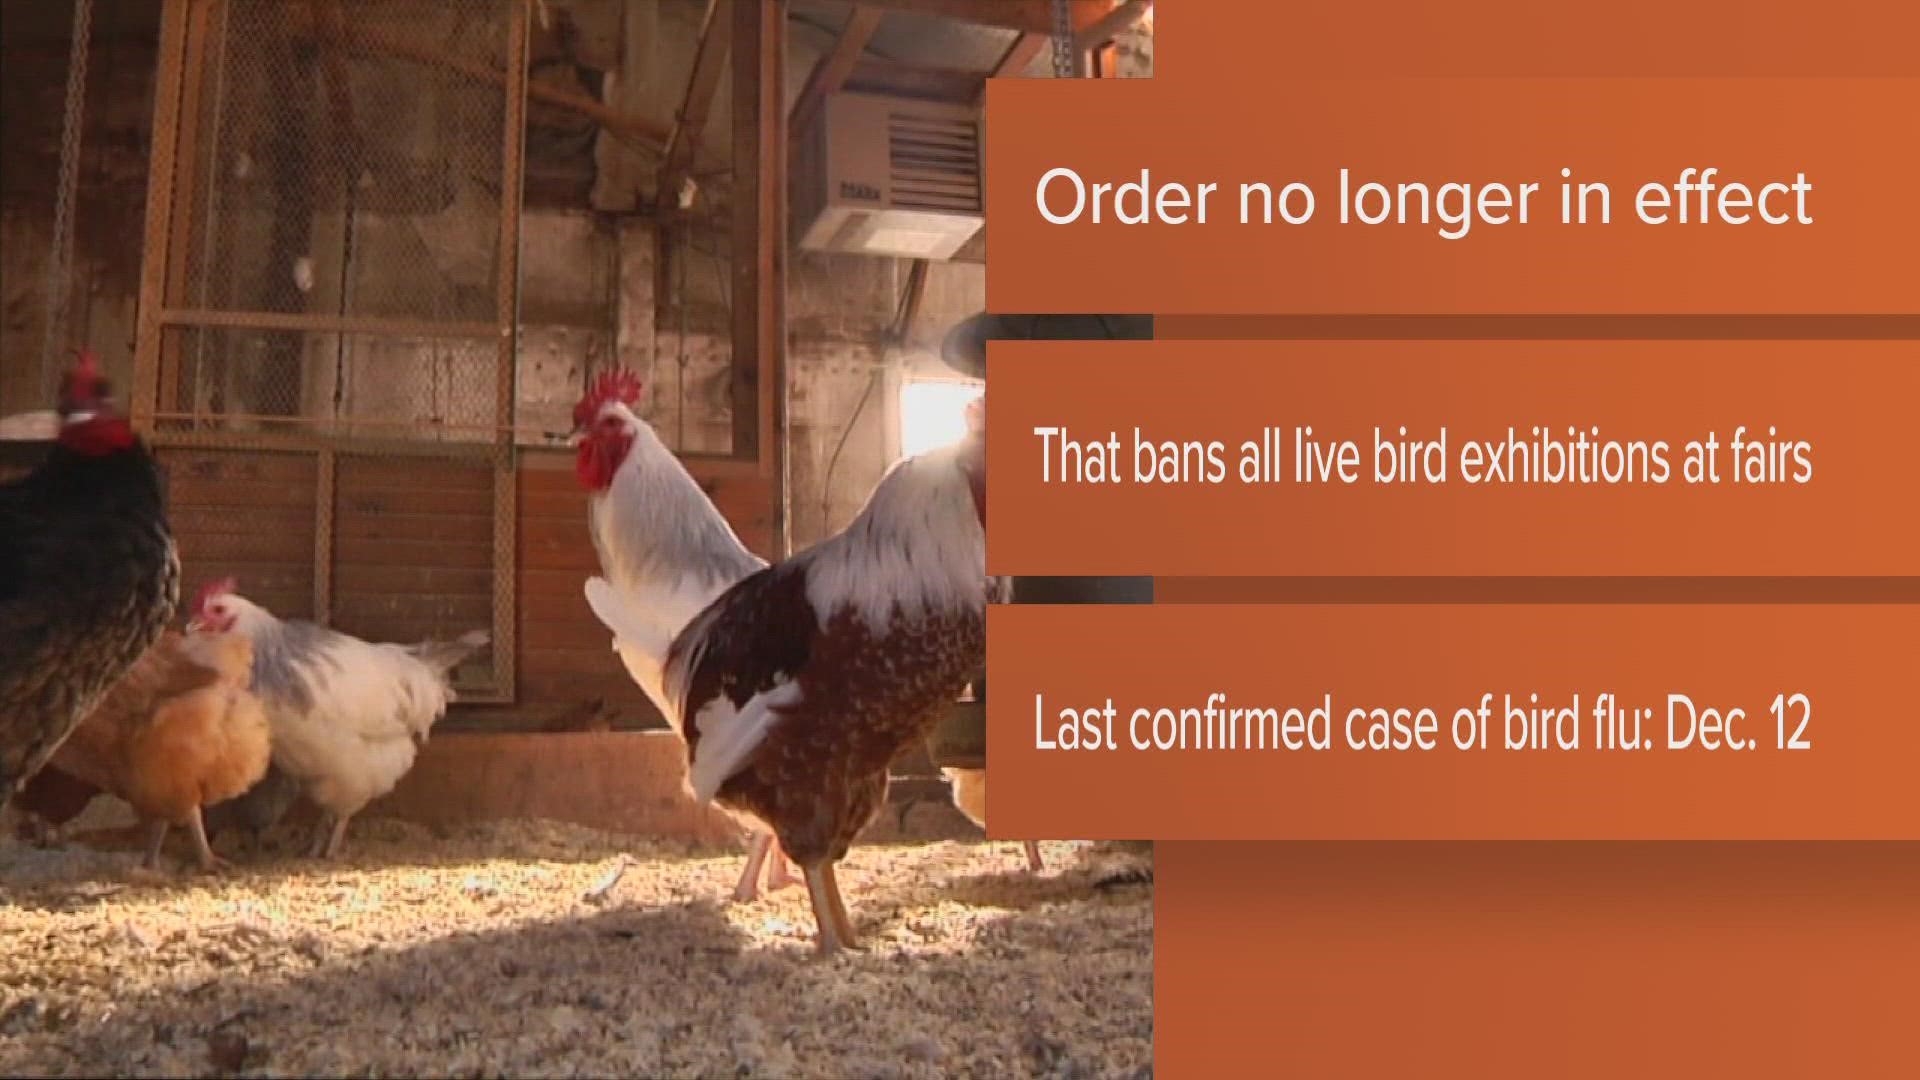 The order was originally instated on Nov. 10 in response to cases of highly pathogenic avian influenza.